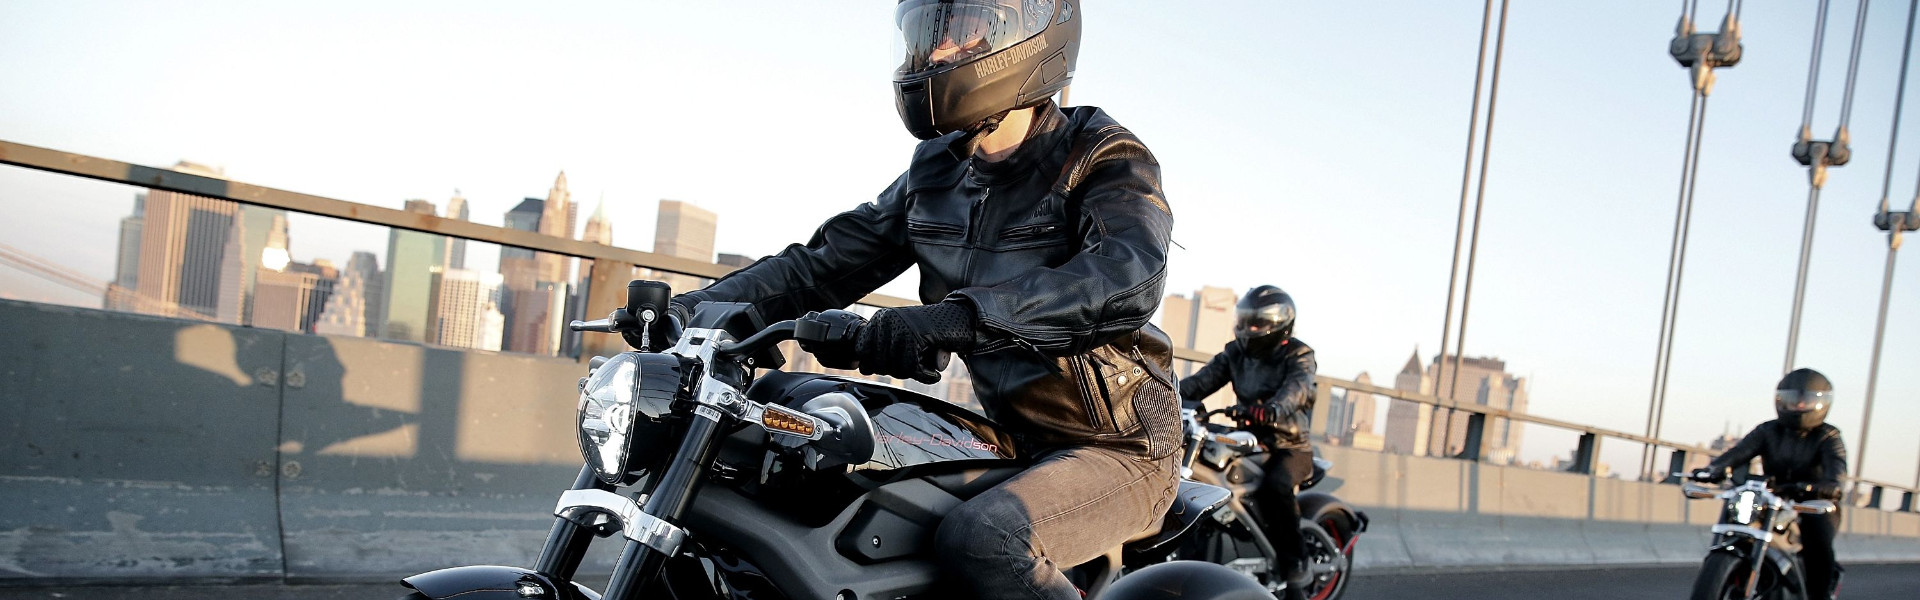 Everything You Need to Know Before Buying a Motorcycle